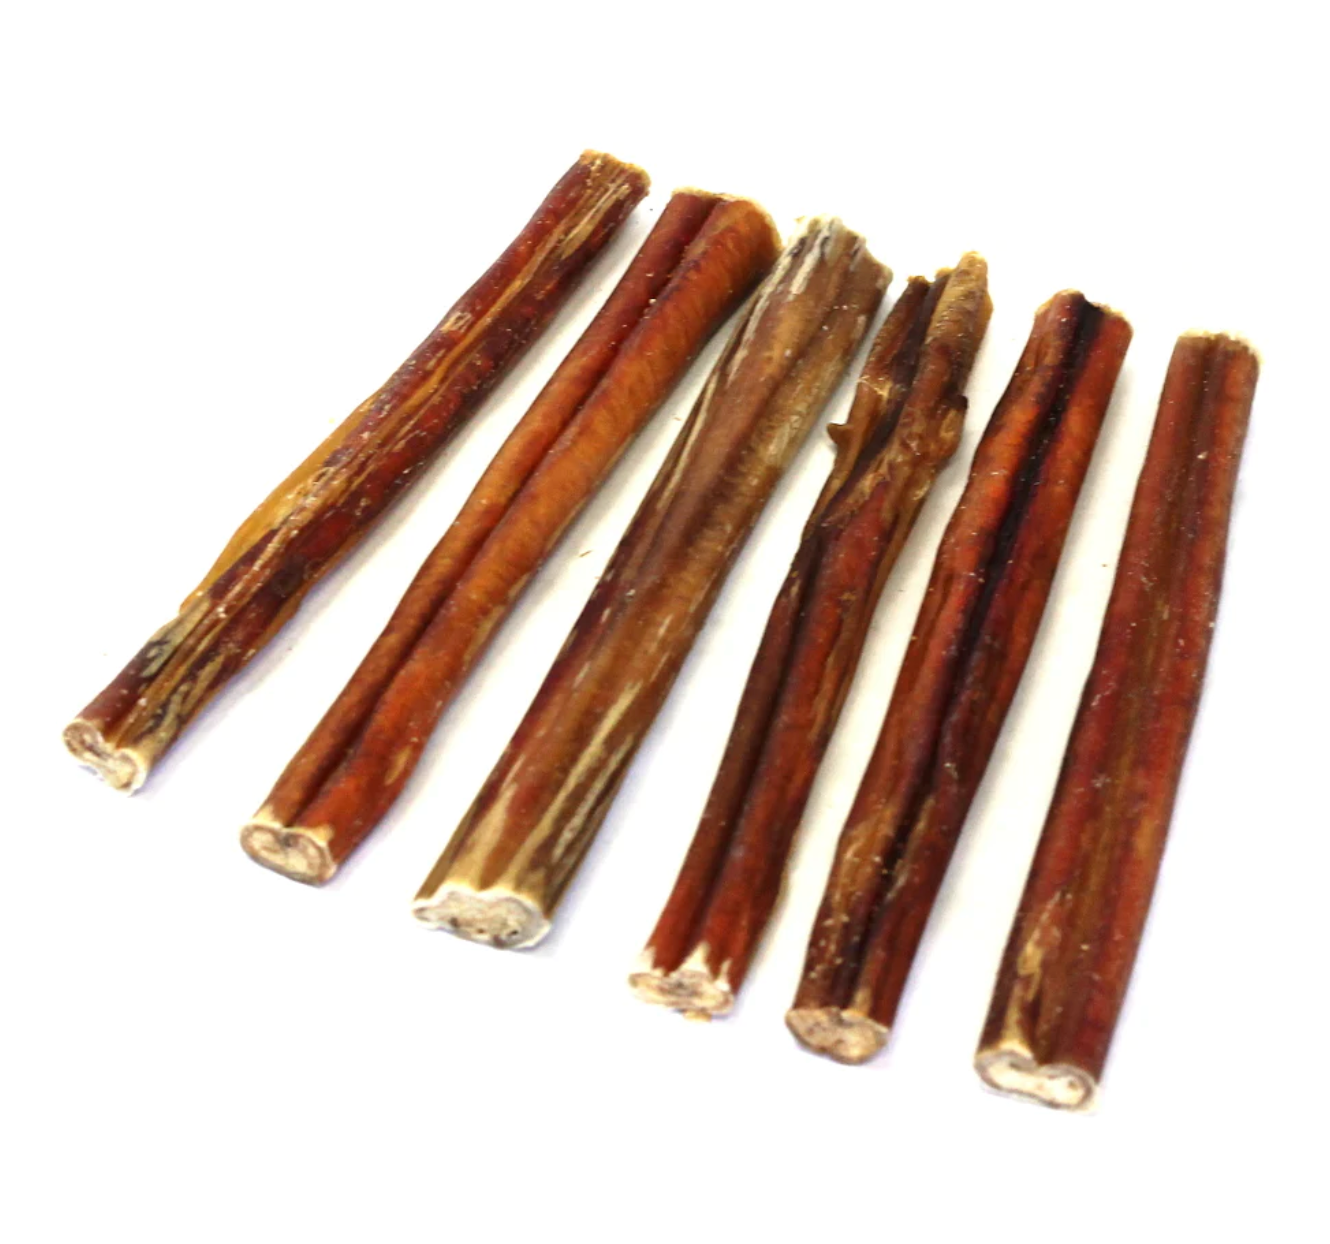 6" bully stick, tough chew for dogs displayed in a row isolated